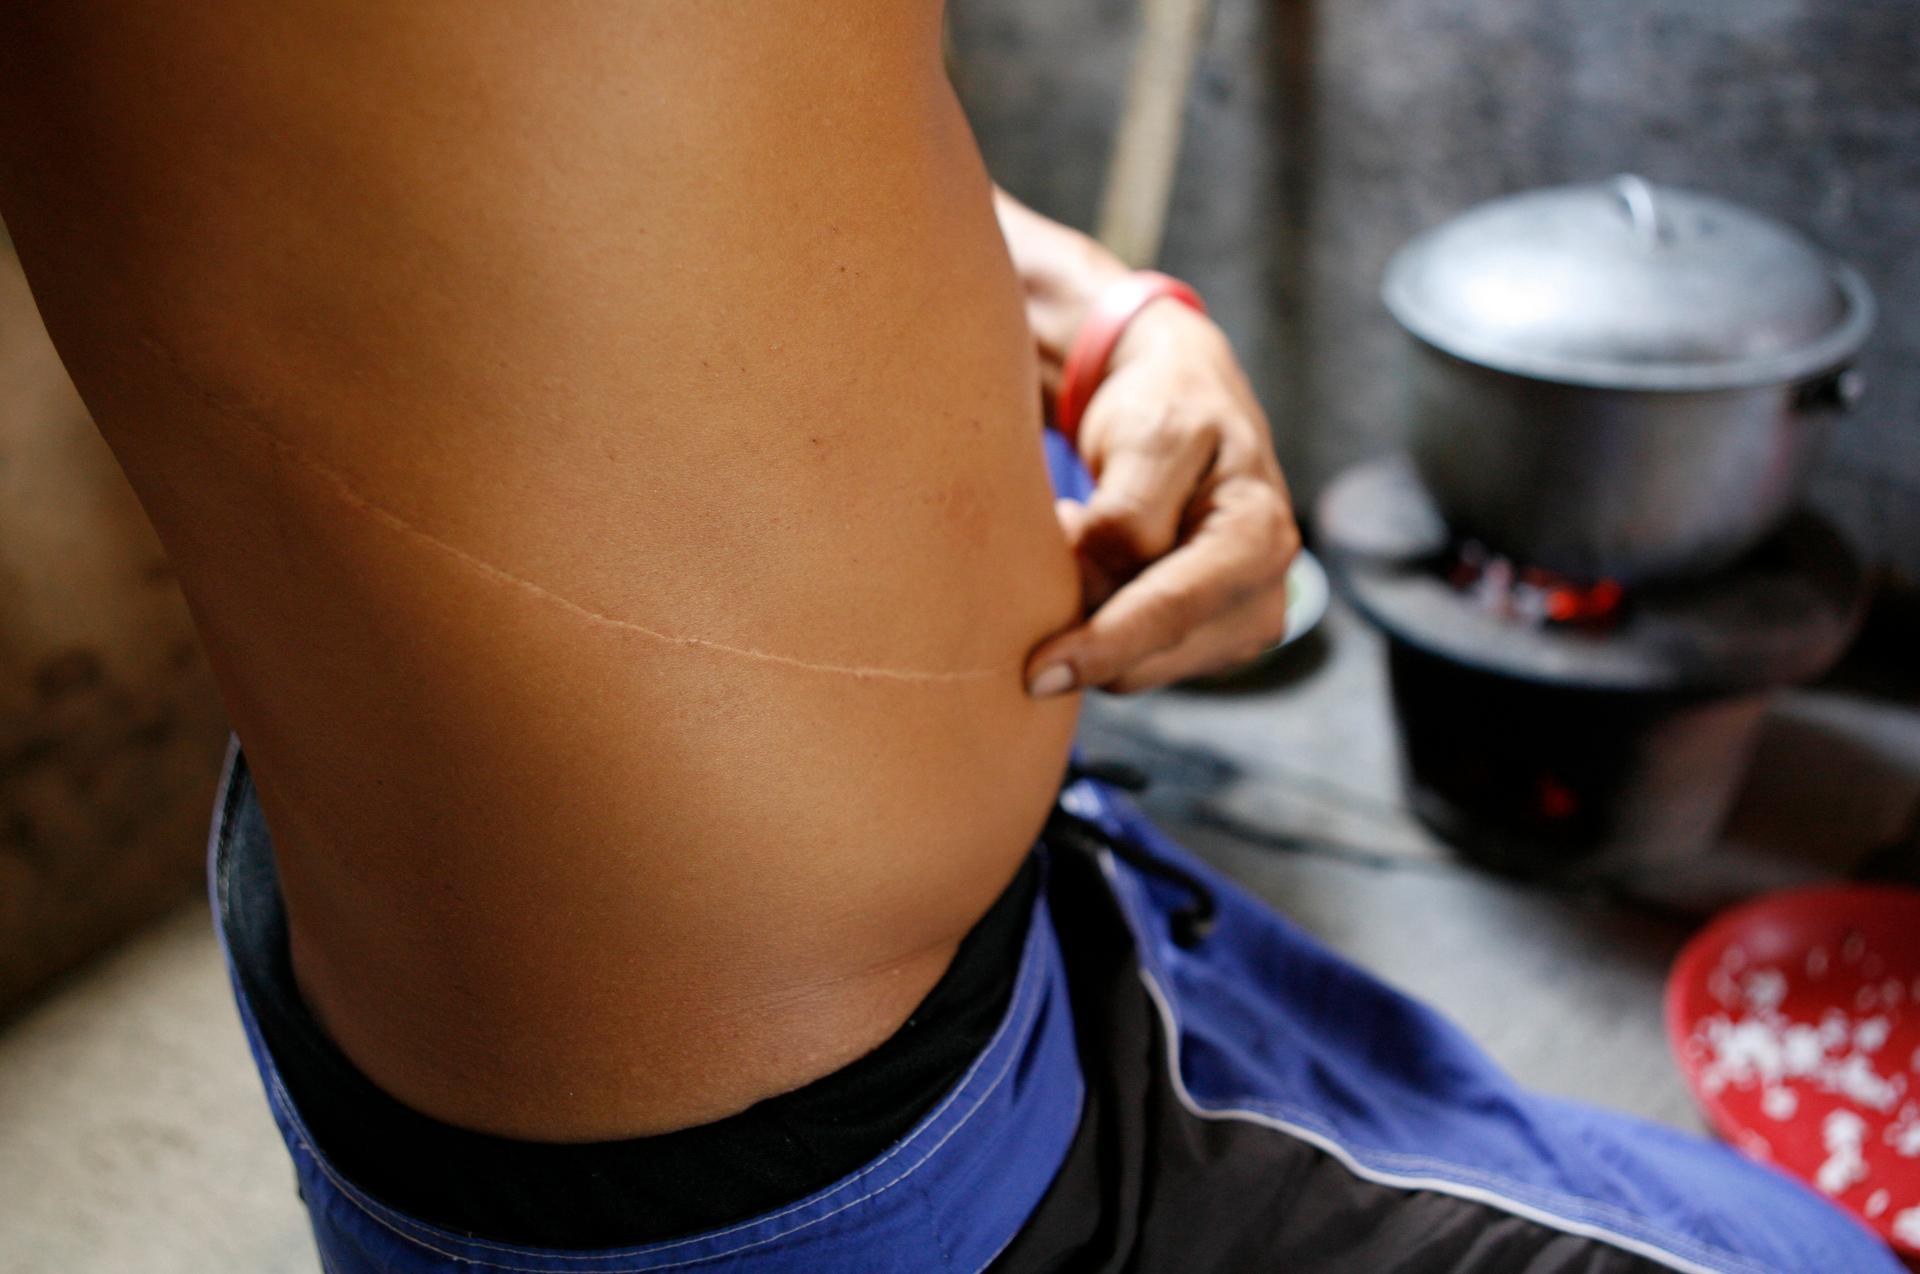 An unidentified Filipino man who sold his kidney for a transplant shows his scar while cooking at his home in a slum of Manila.